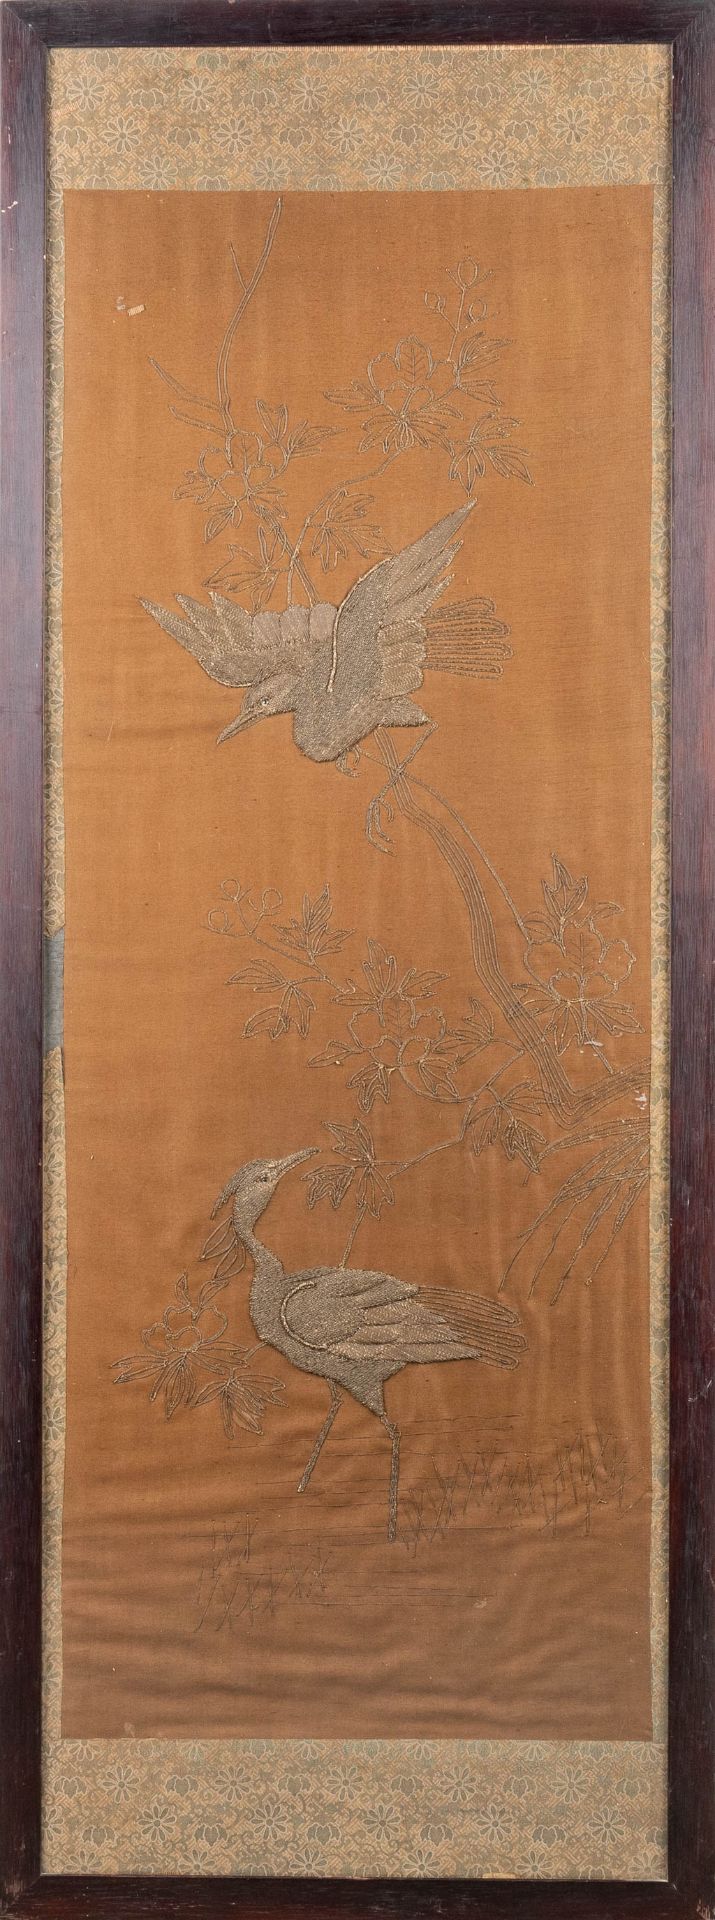 A Chinese embroidery with images of two birds, 19th C. (130 x 50 cm) - Bild 4 aus 6